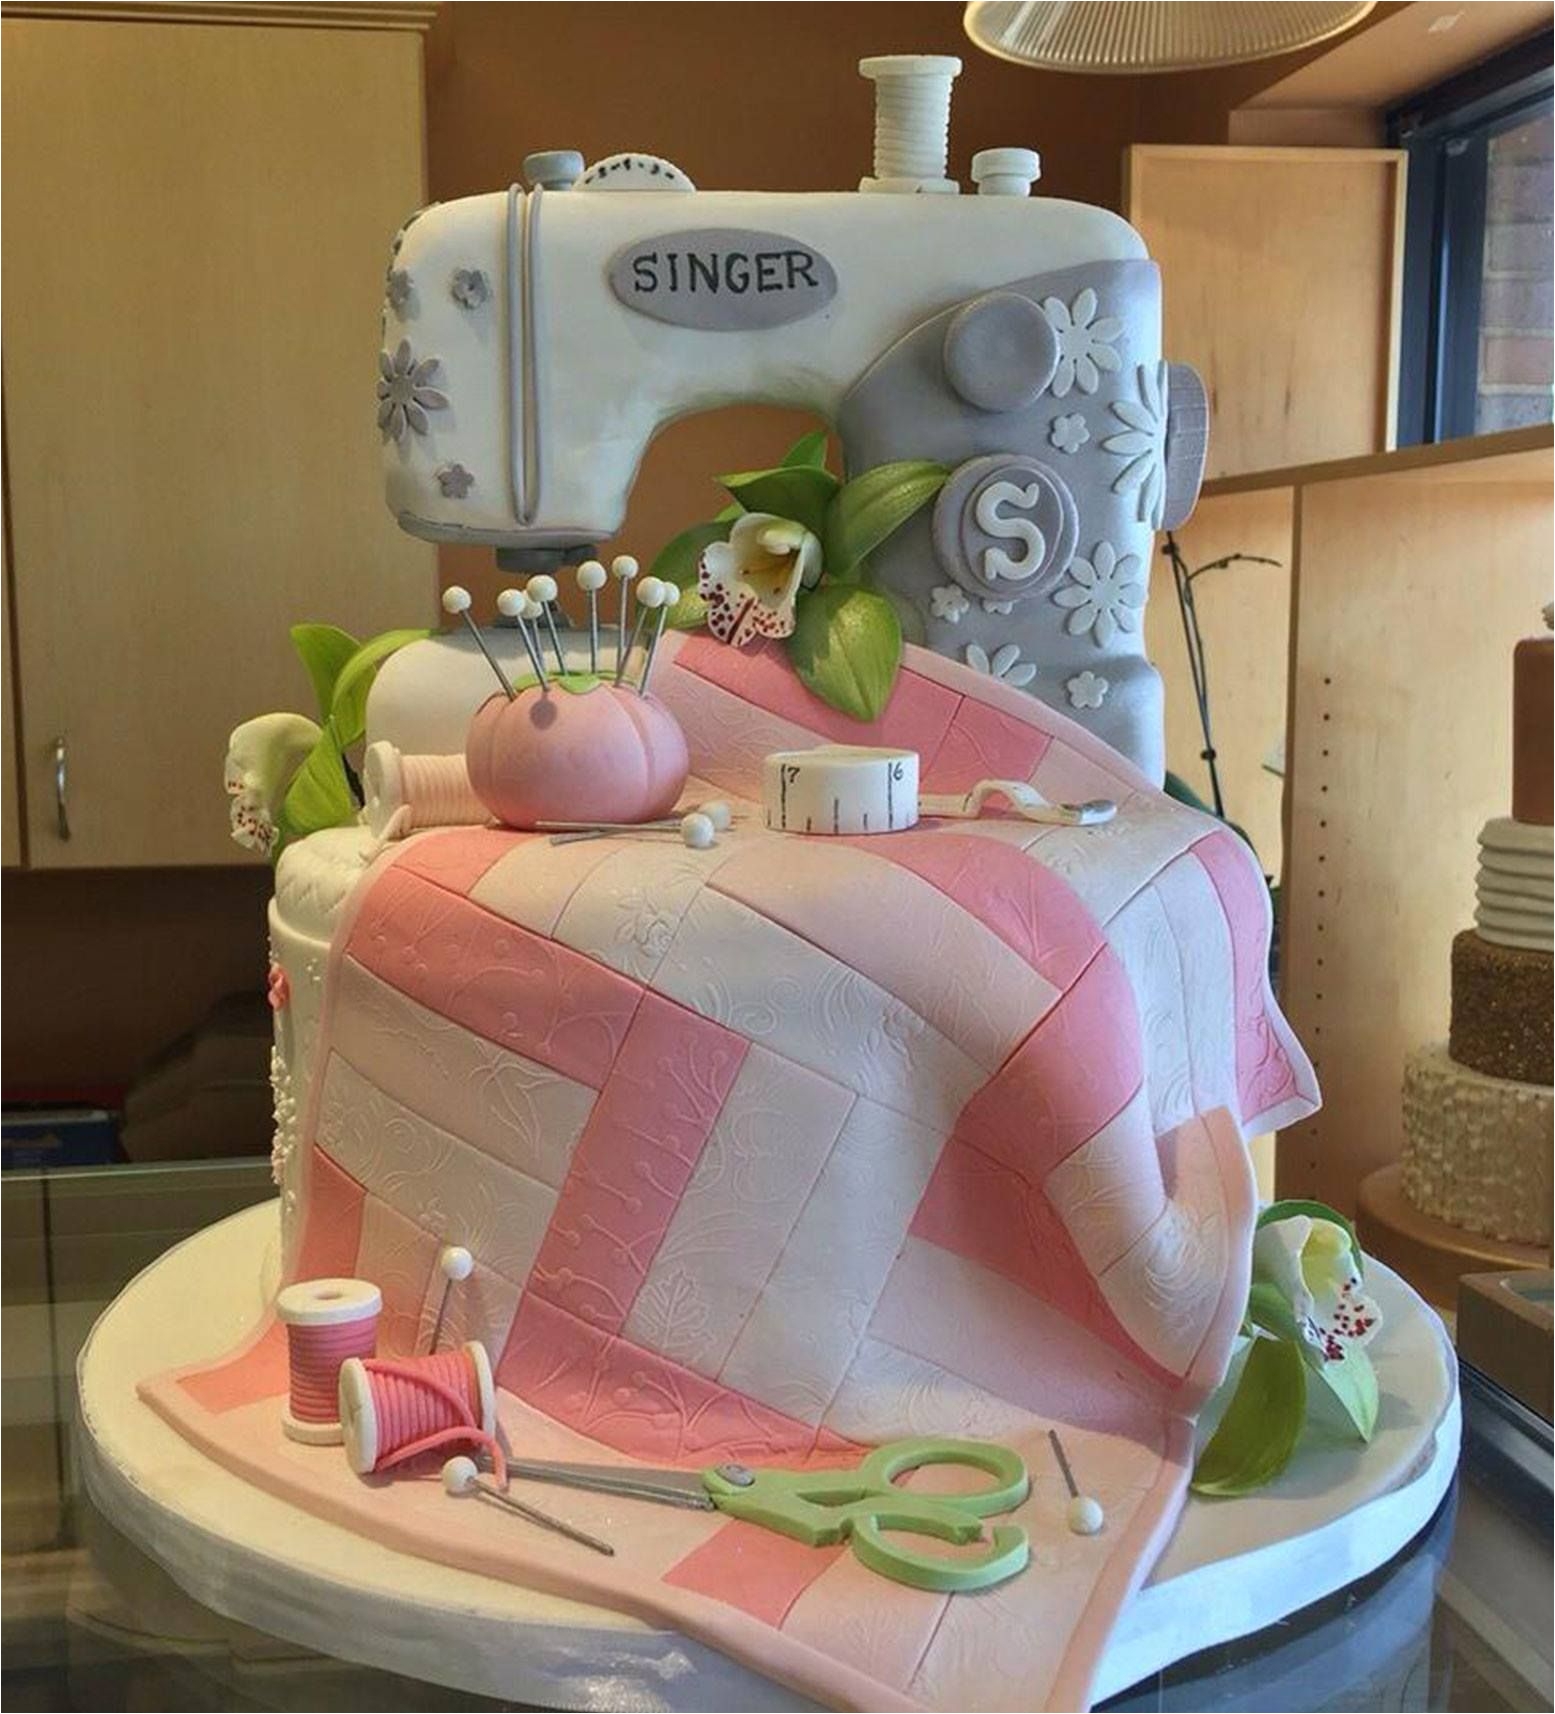 sewing machine cake these are the best cake ideas